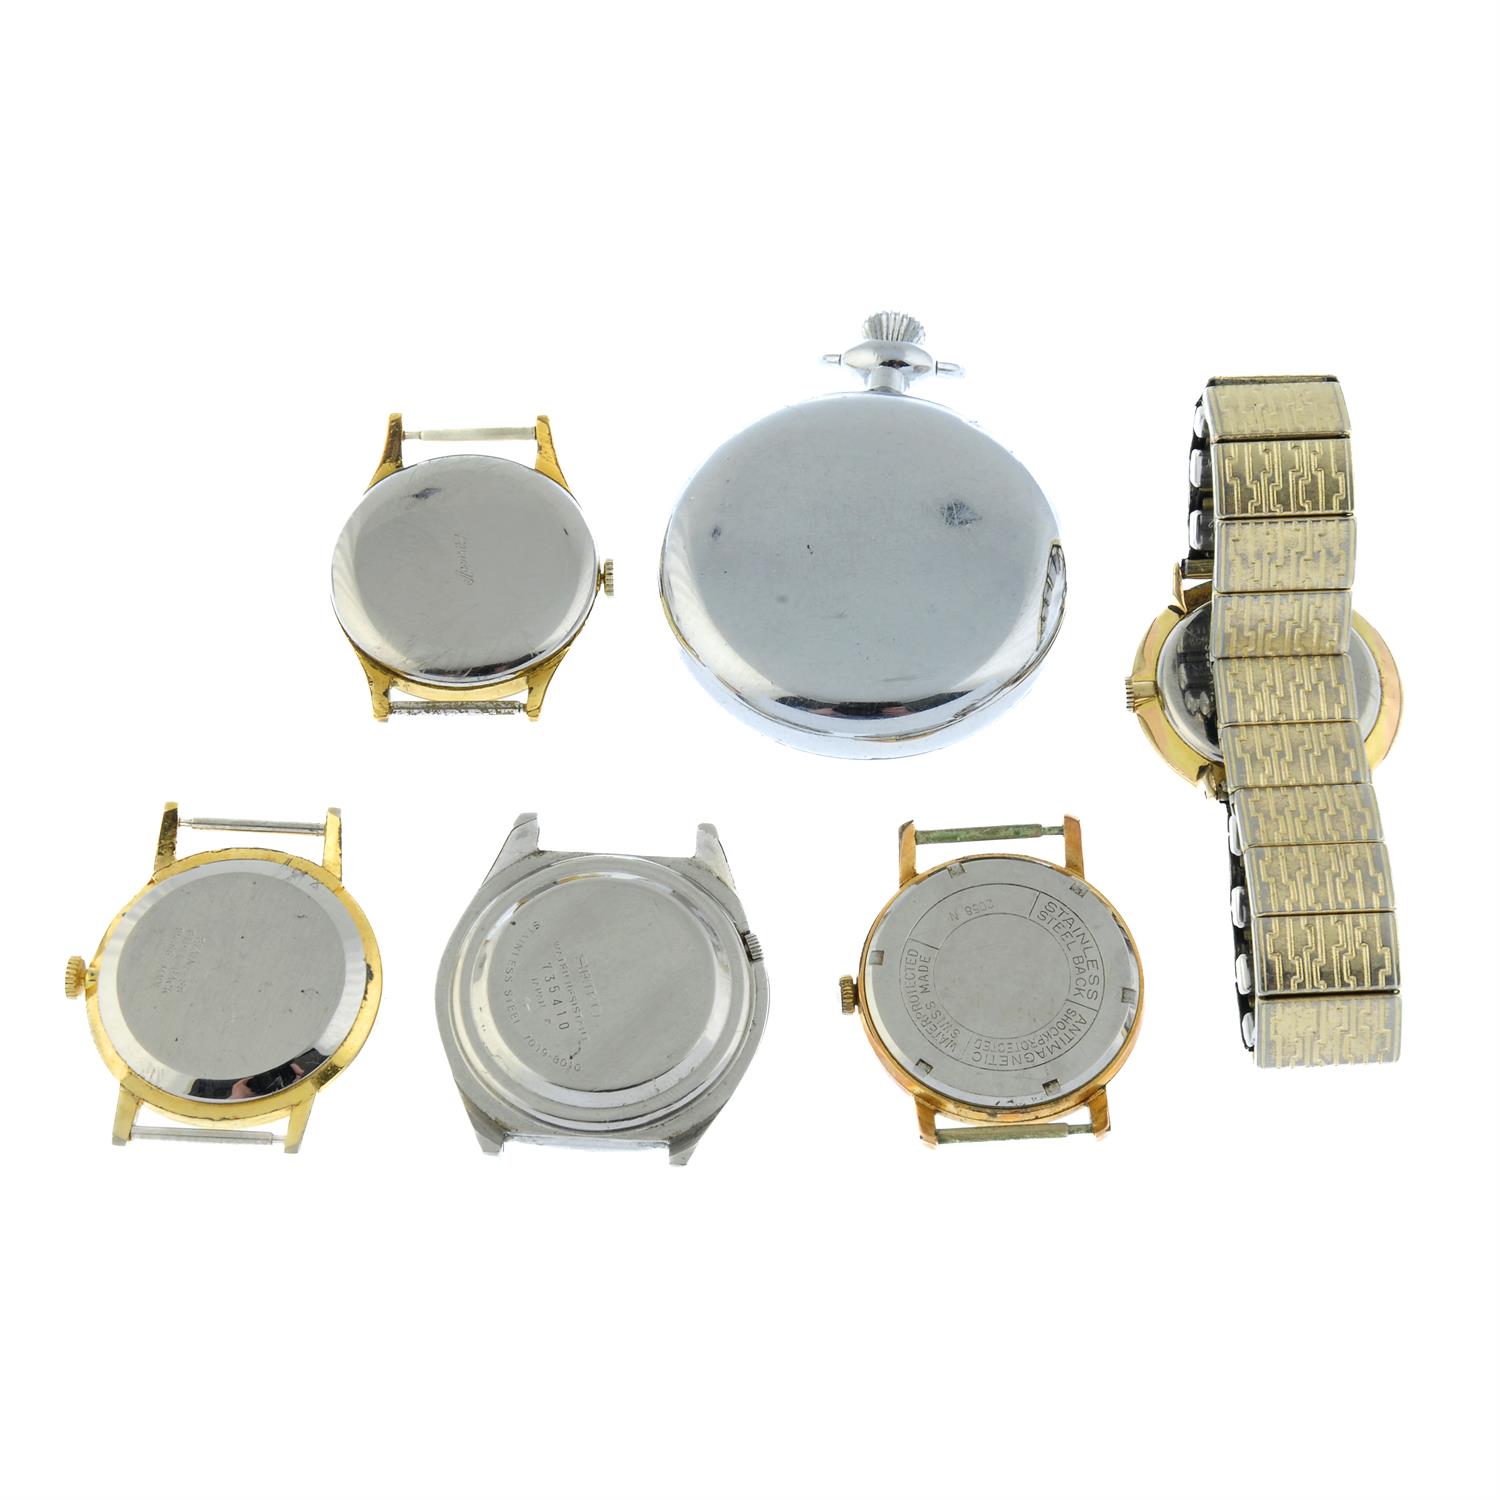 A group of four watch heads, a watch and a stopwatch. - Image 2 of 2